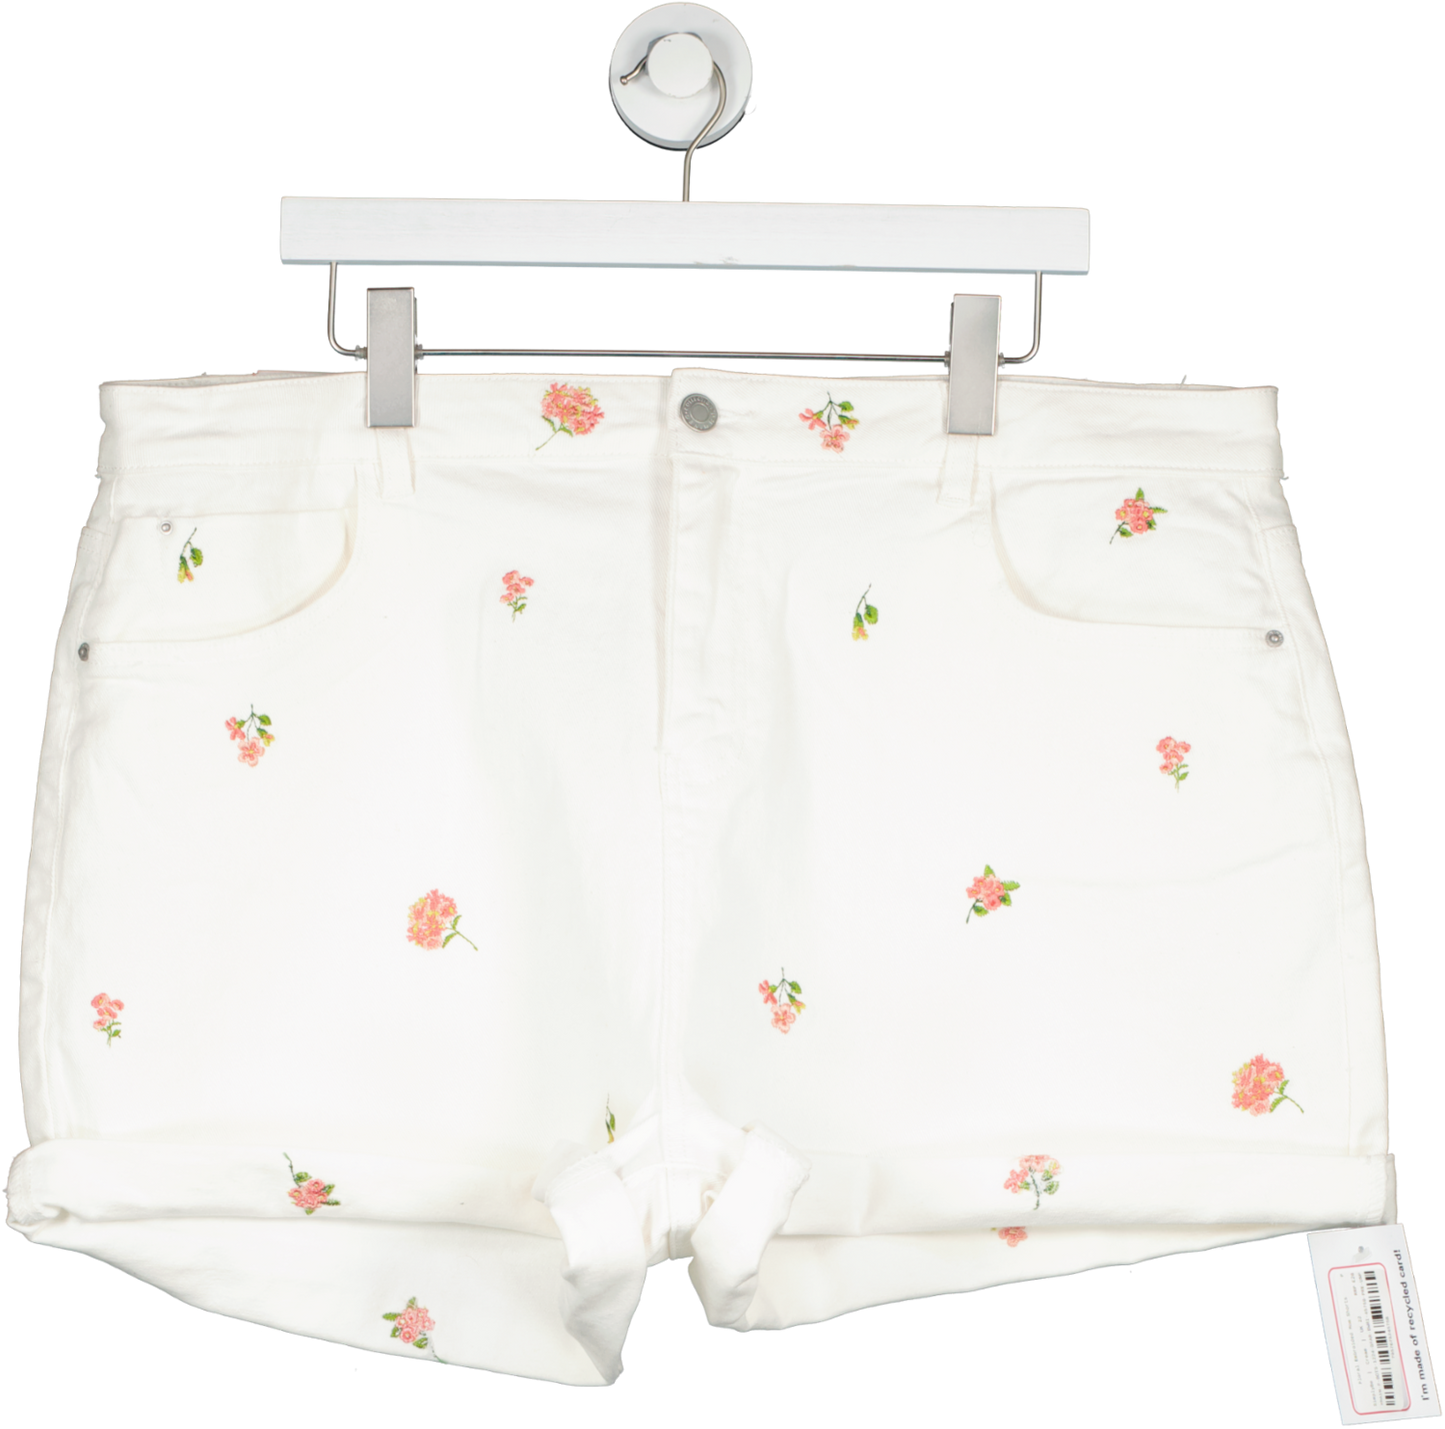 SimplyBe Cream Floral Embroided Mom Shorts UK 22